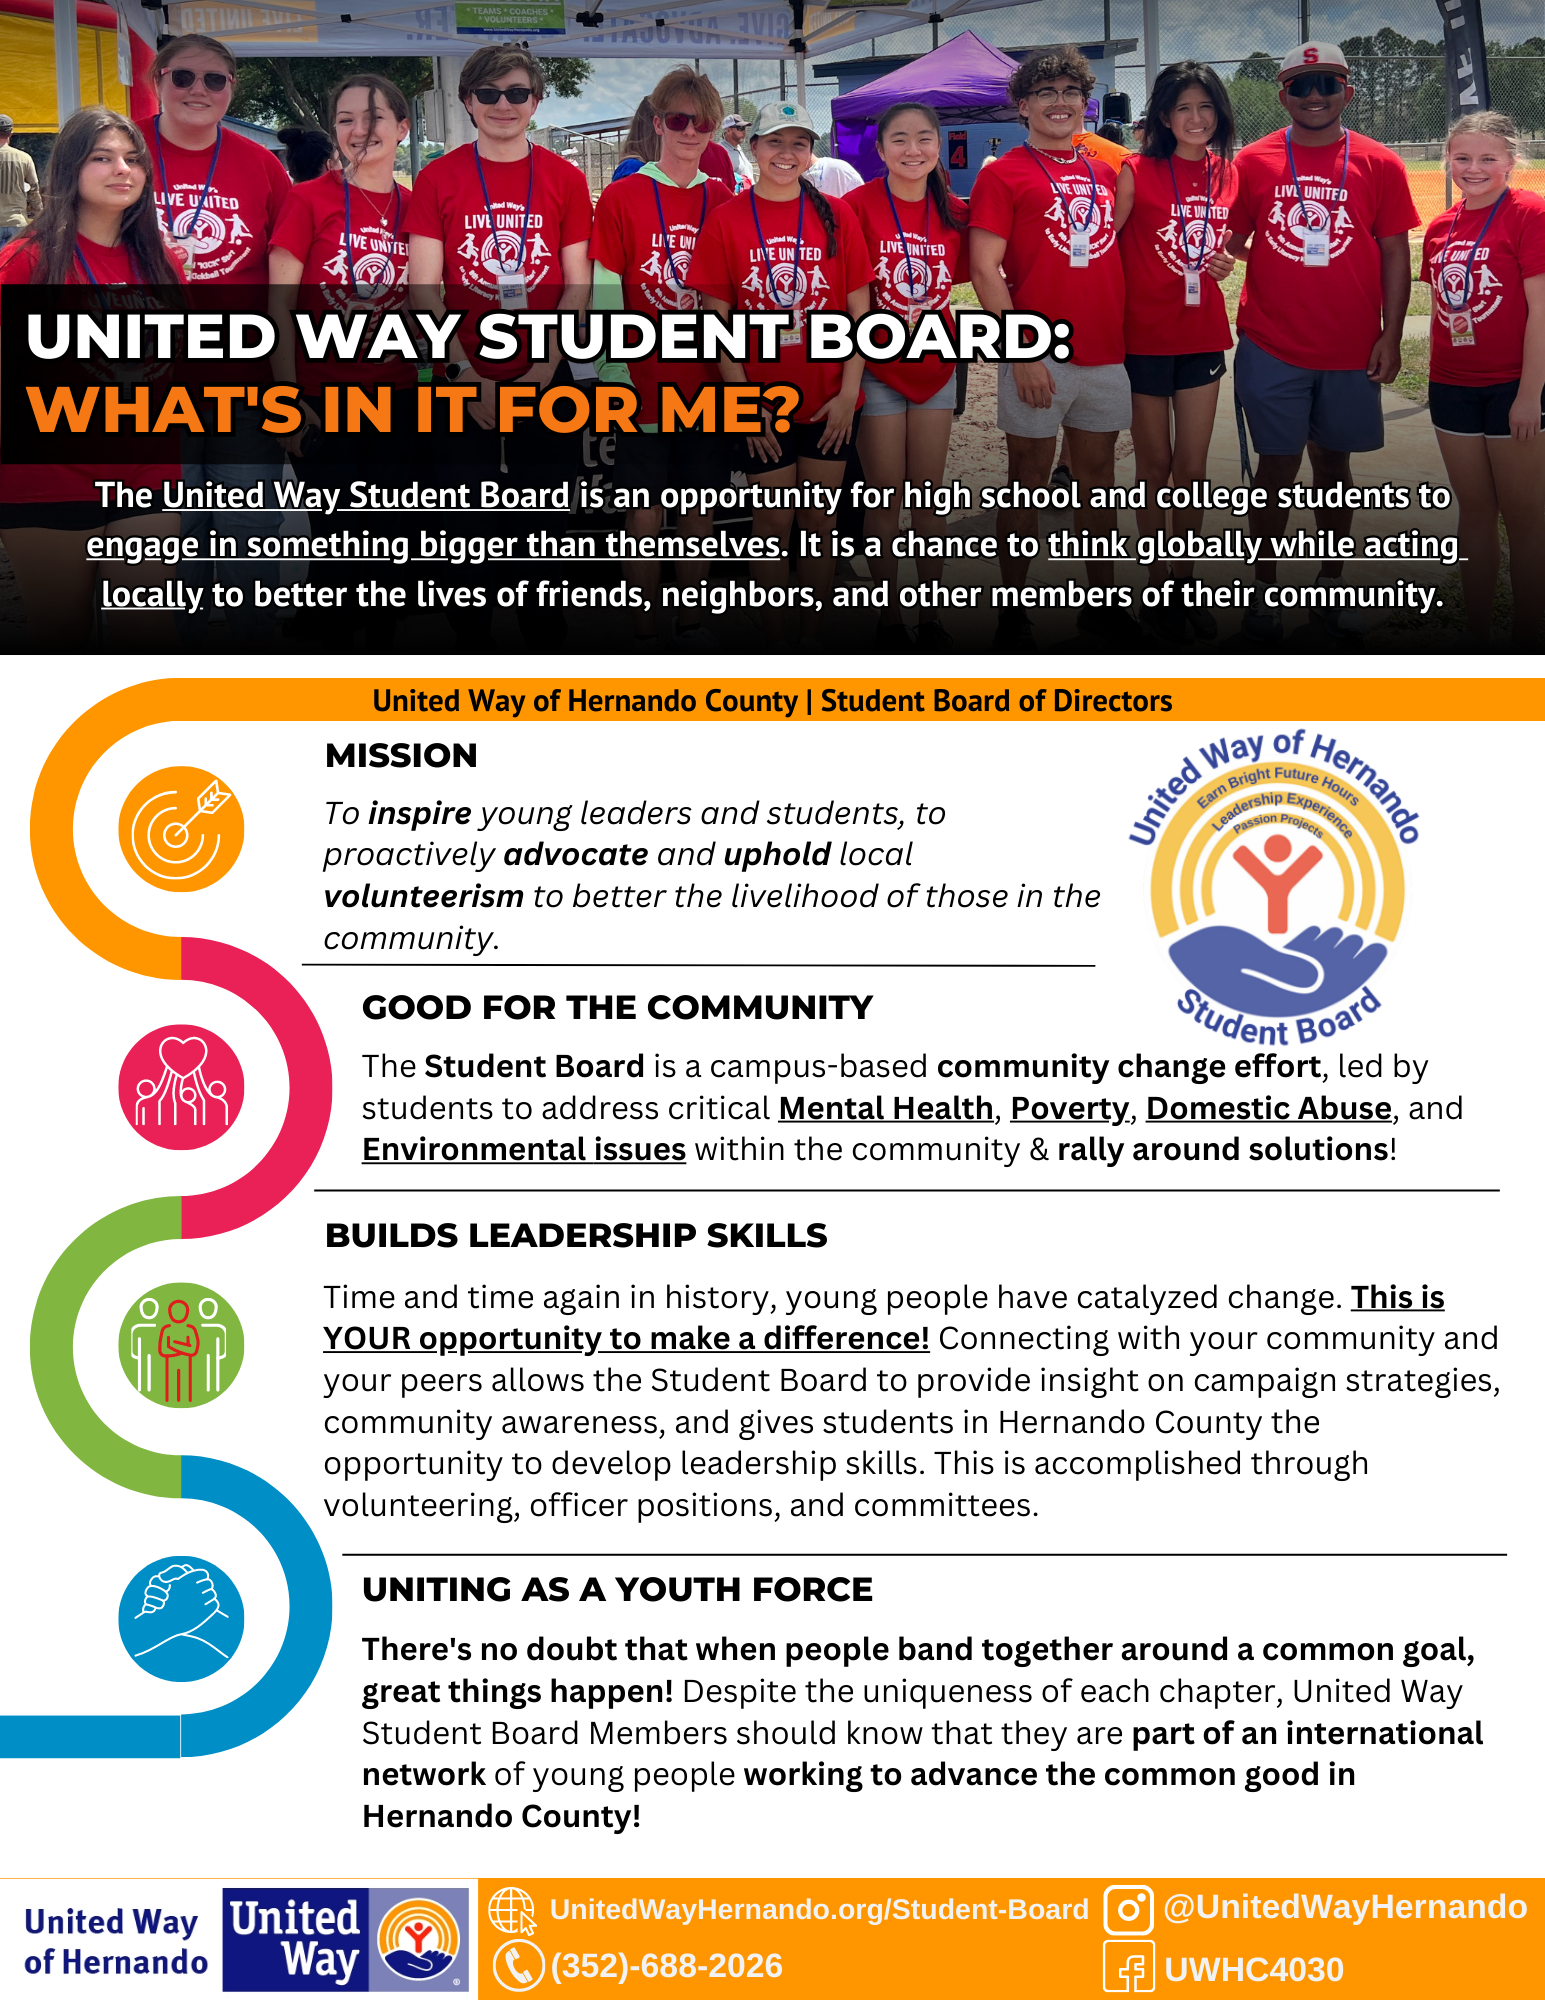 United Way Student Board: What's In it For Me?